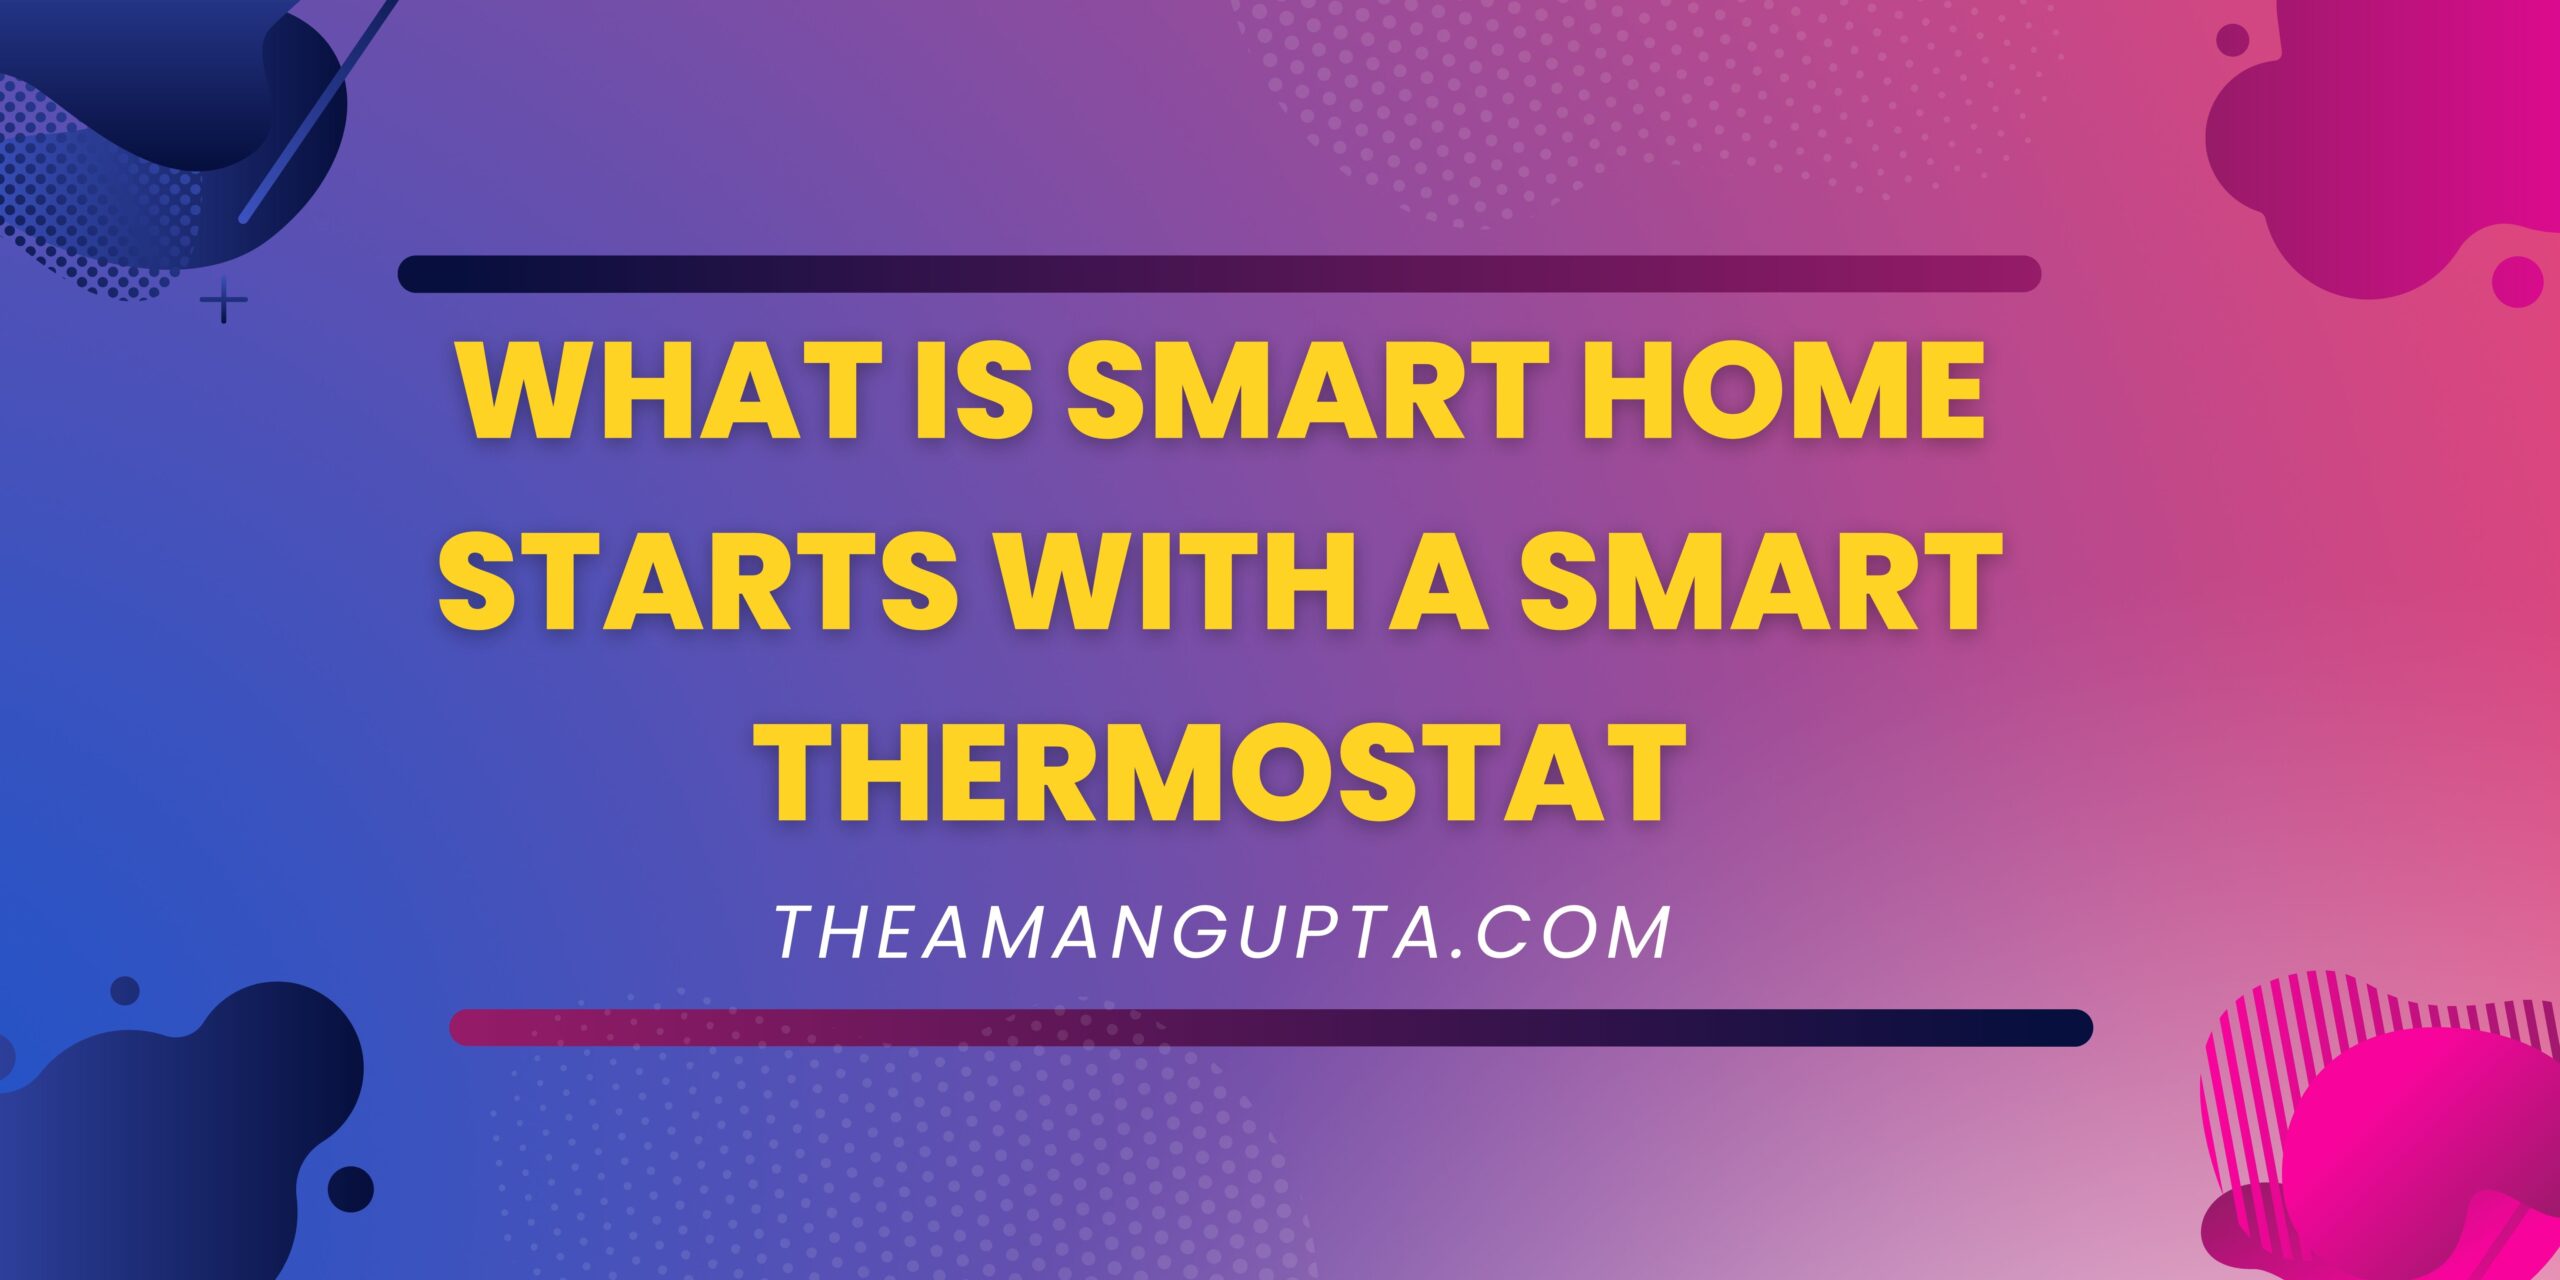 What Is Smart Home Starts With A Smart Thermostat|Smart Thermostat|Theamangupta|Theamangupta